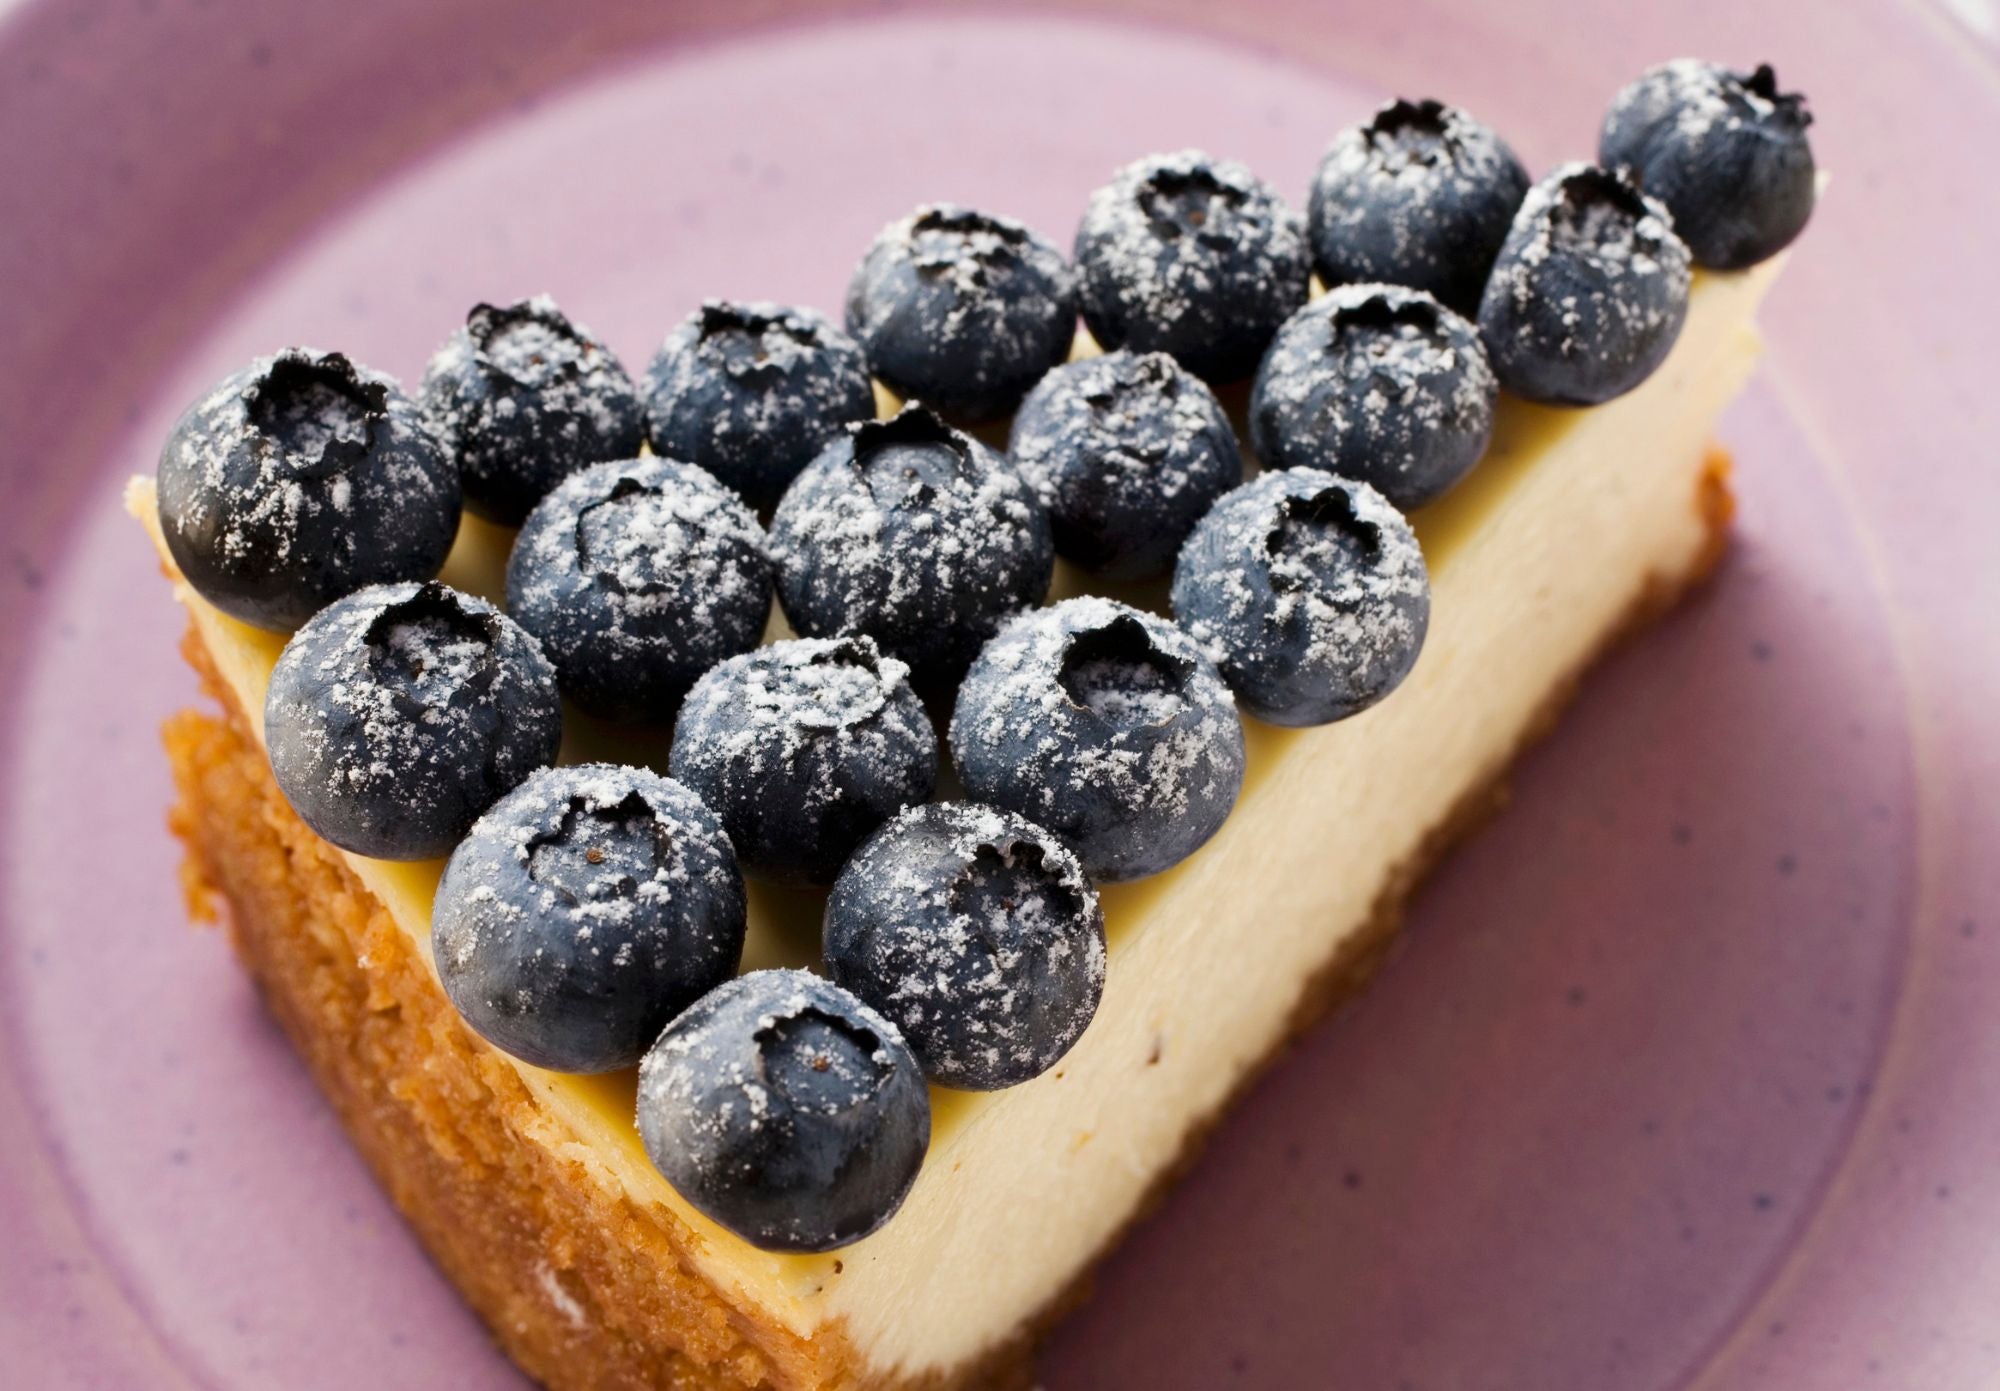 It's National Blueberry Cheesecake Day!